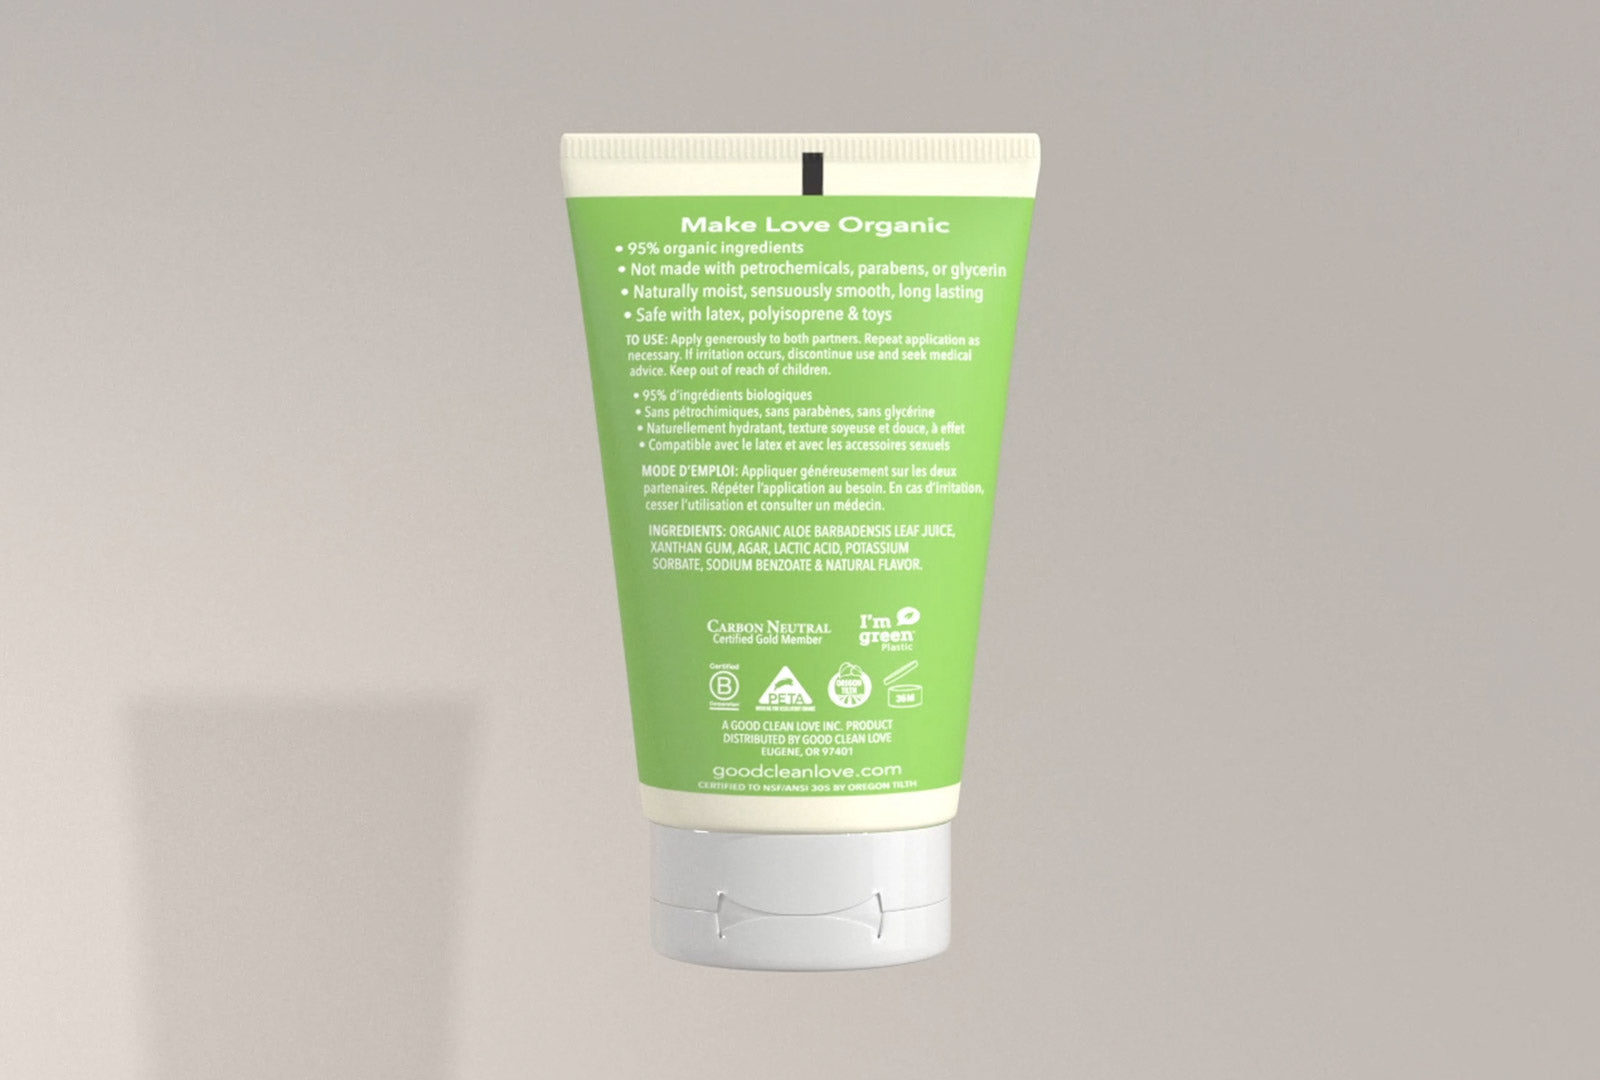 Almost Naked Organic Personal Lubricant – One & Body Store